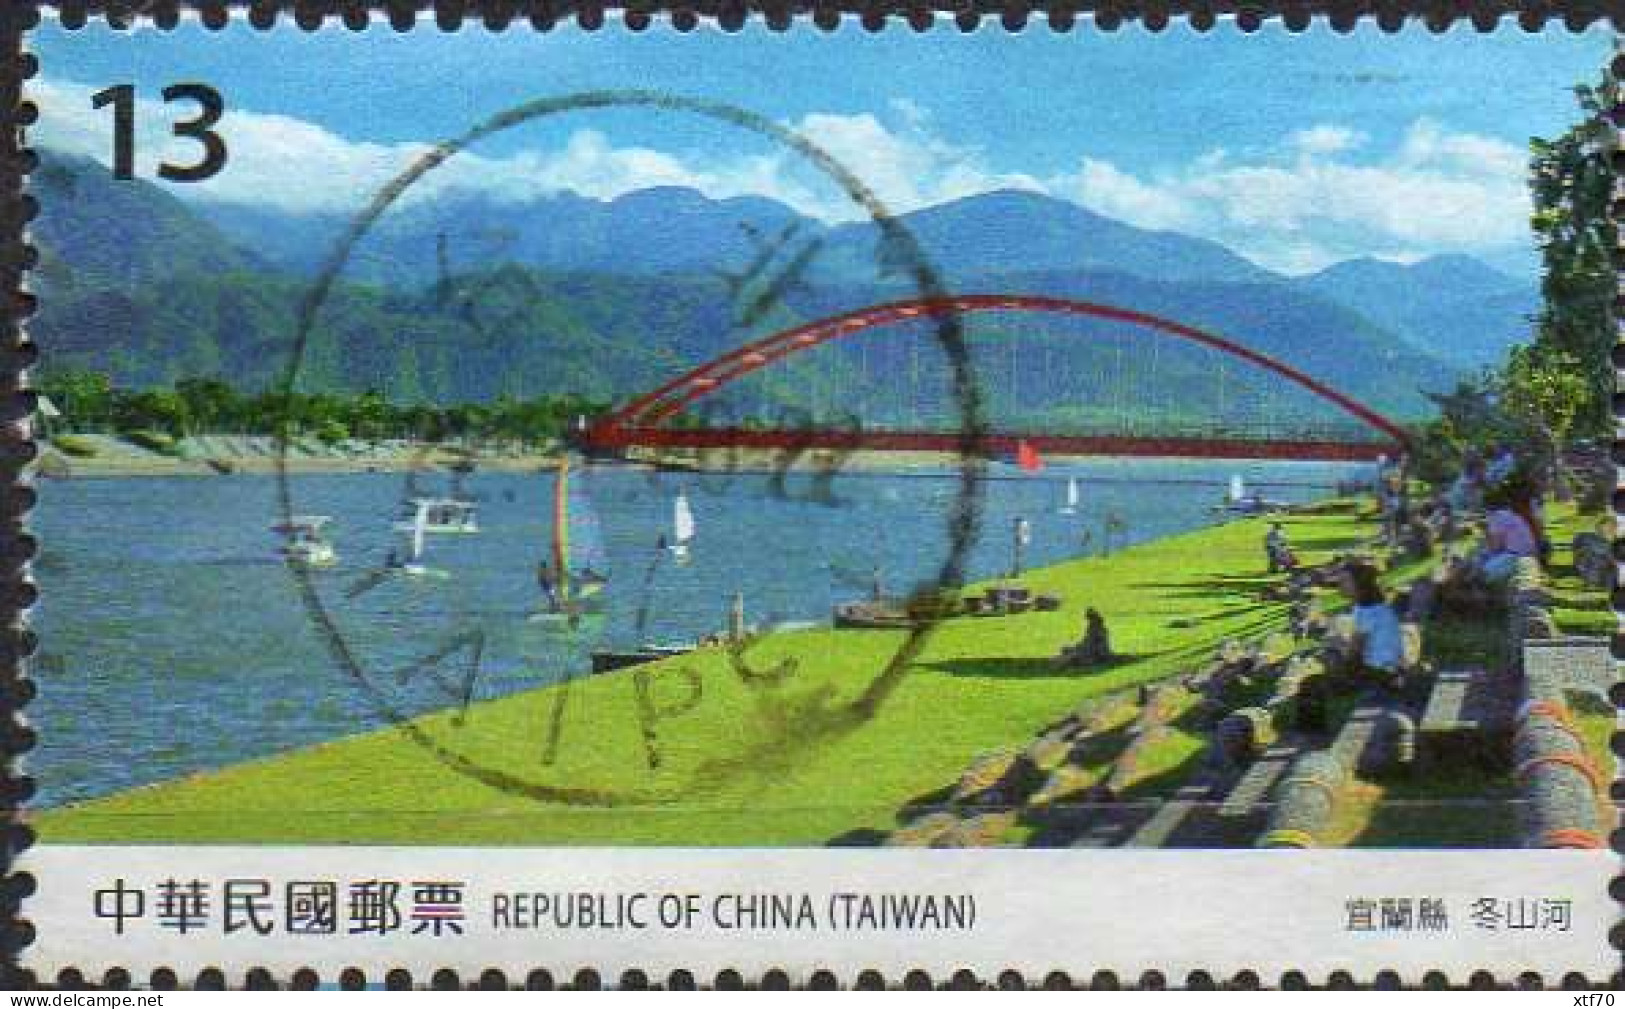 TAIWAN 2019 Tourism. $13 Yilan County - Used Stamps